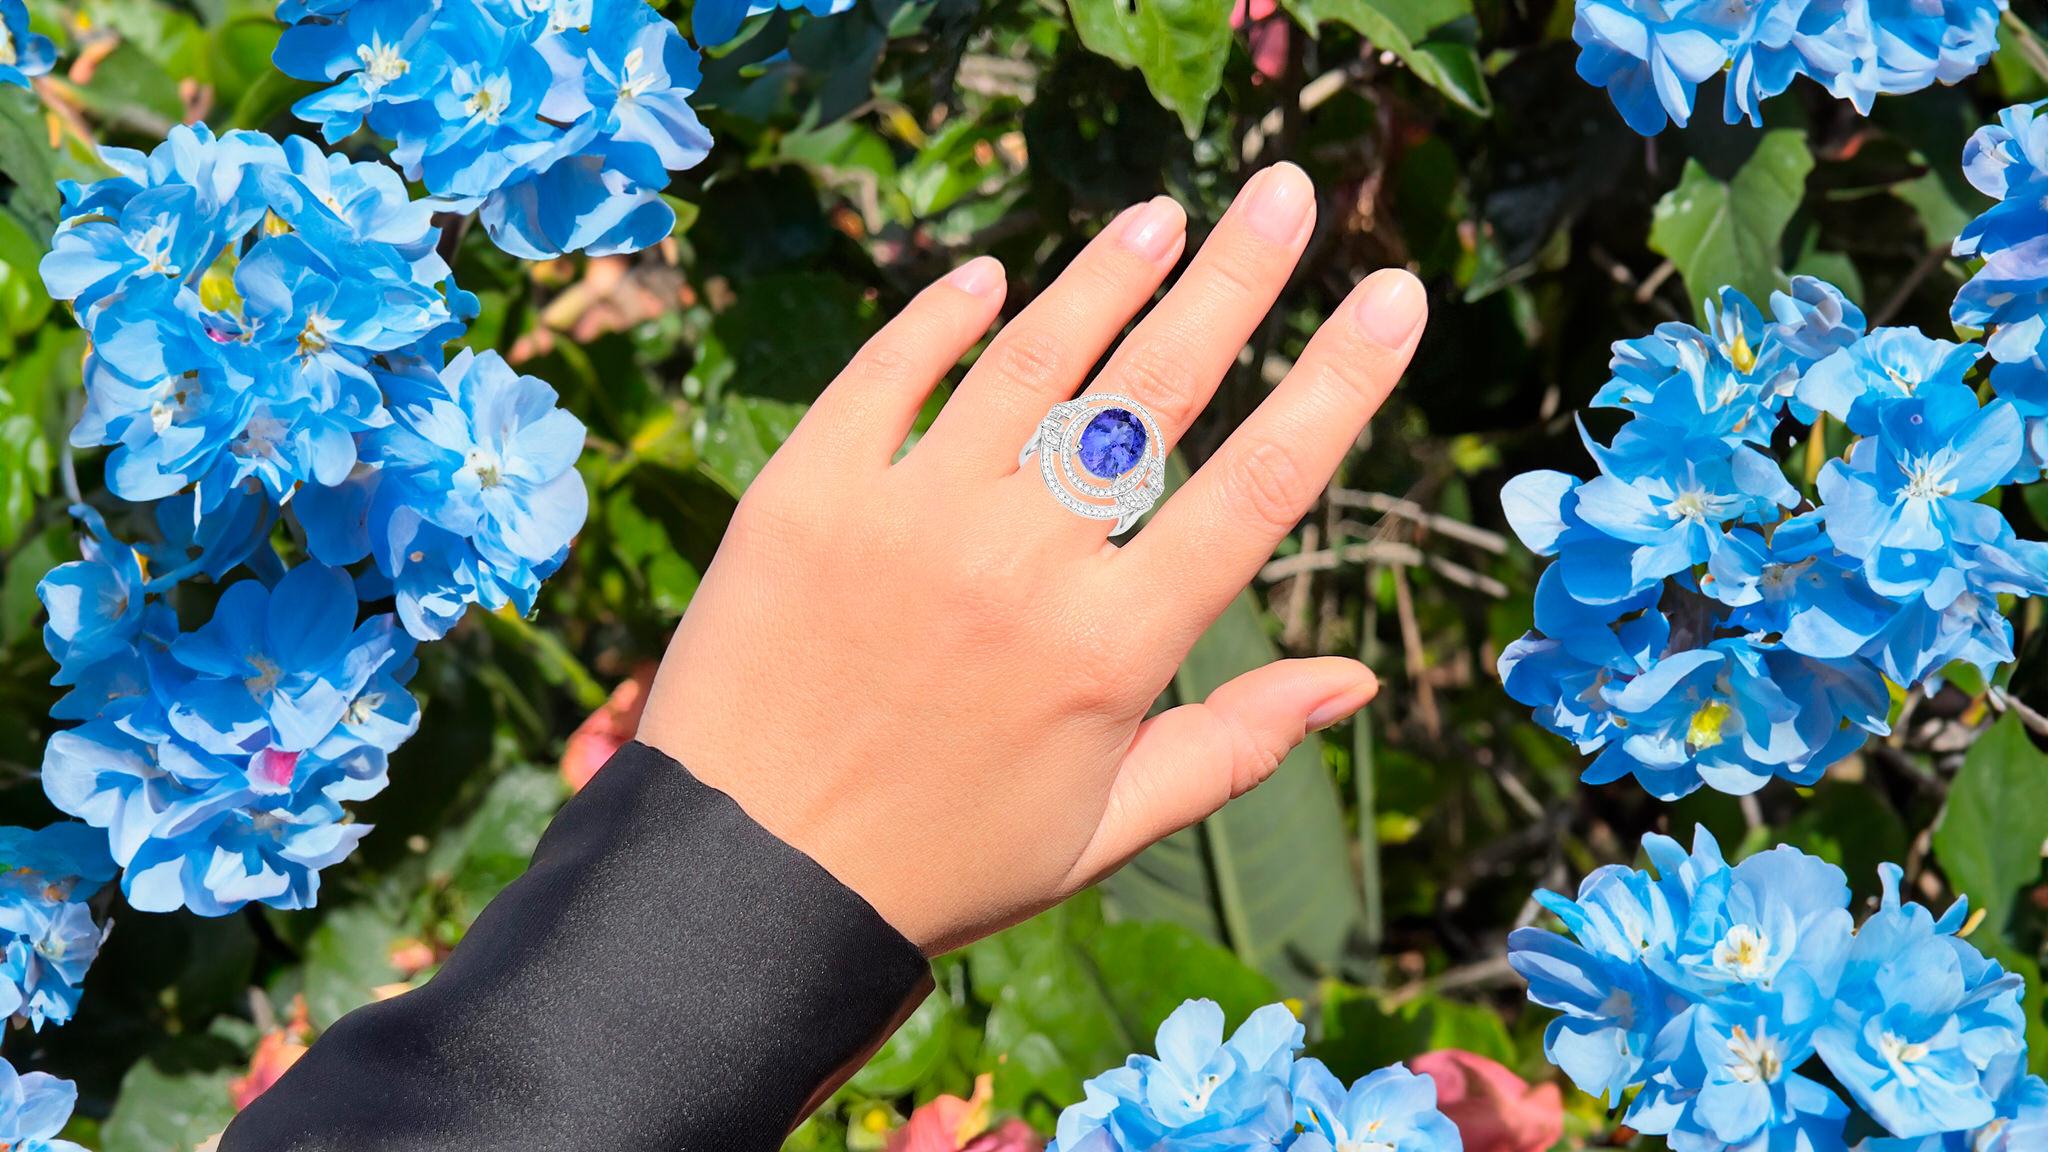 It comes with the Gemological Appraisal by GIA GG/AJP
All Gemstones are Natural
Tanzanite = 6.22 Carat
118 Diamonds = 0.61 Carats
Metal: 14K White Gold
Ring Size: 7* US
*It can be resized complimentary